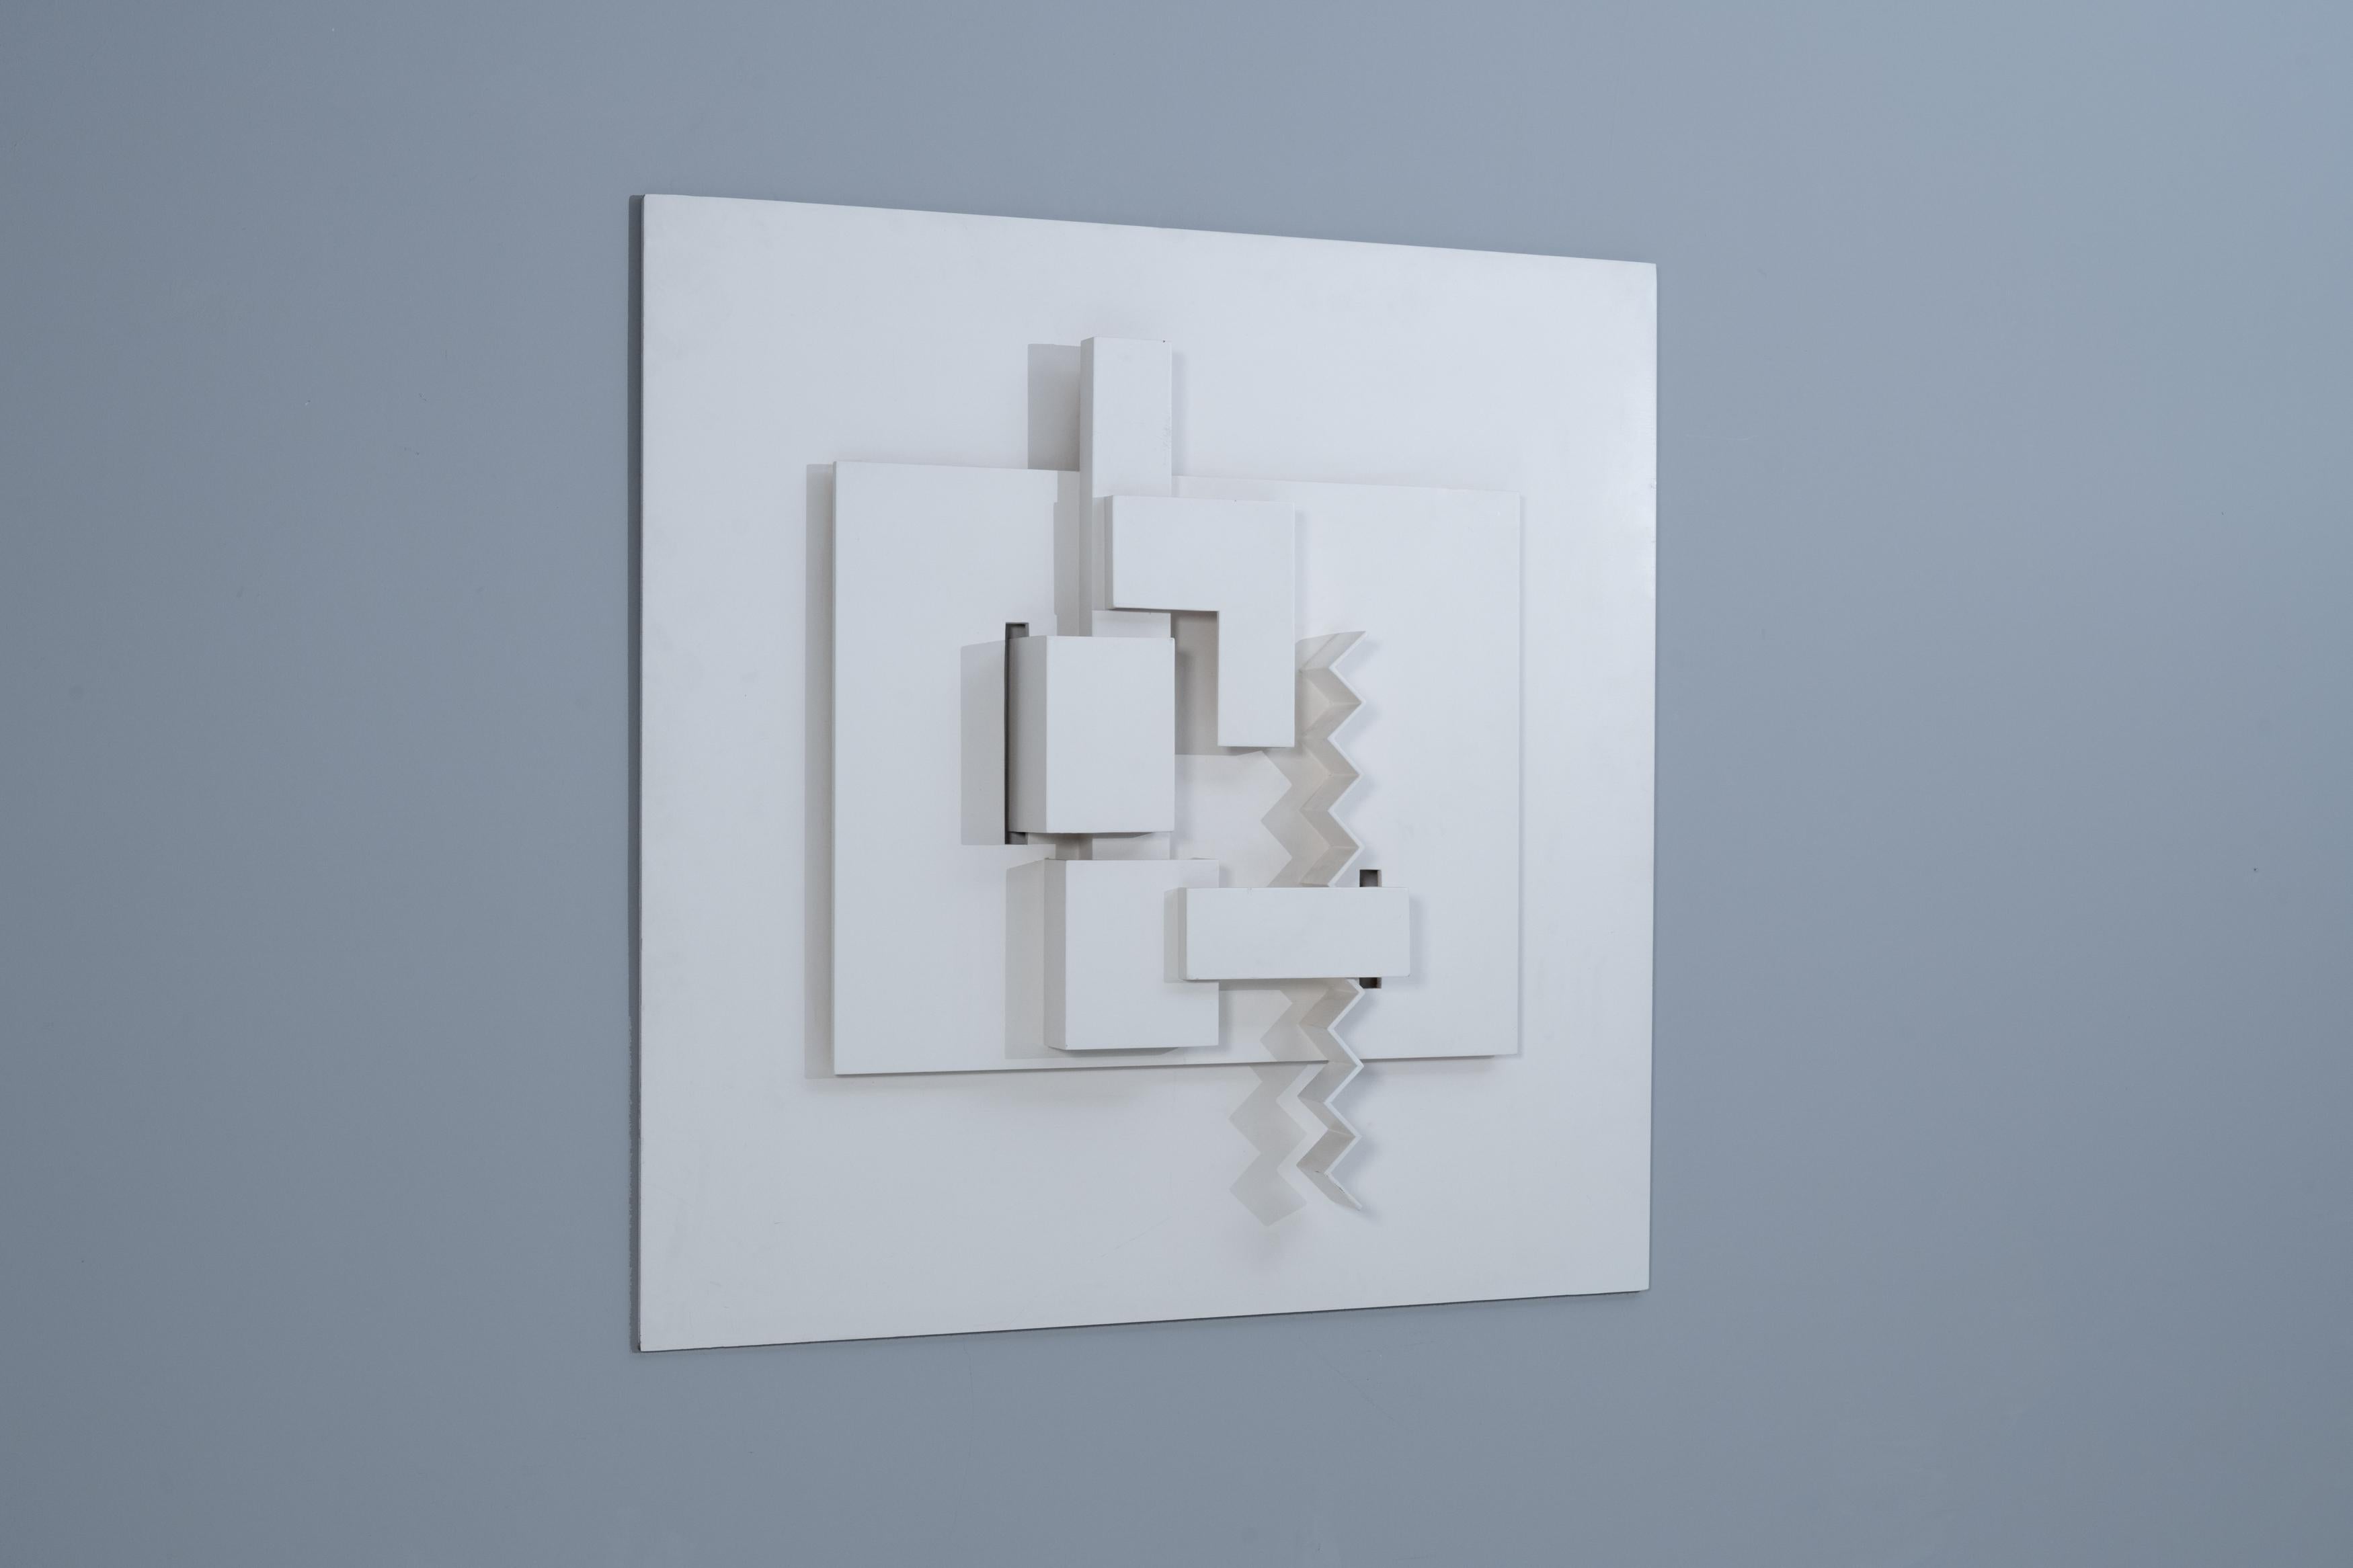 The flat, constructivist wooden relief by Sascha Langer follows a geometric vocabulary of forms in a convincing proportional relationship. The stacked segments create spatial depth and challenge the viewer’s vision.
When viewed, the picture creates